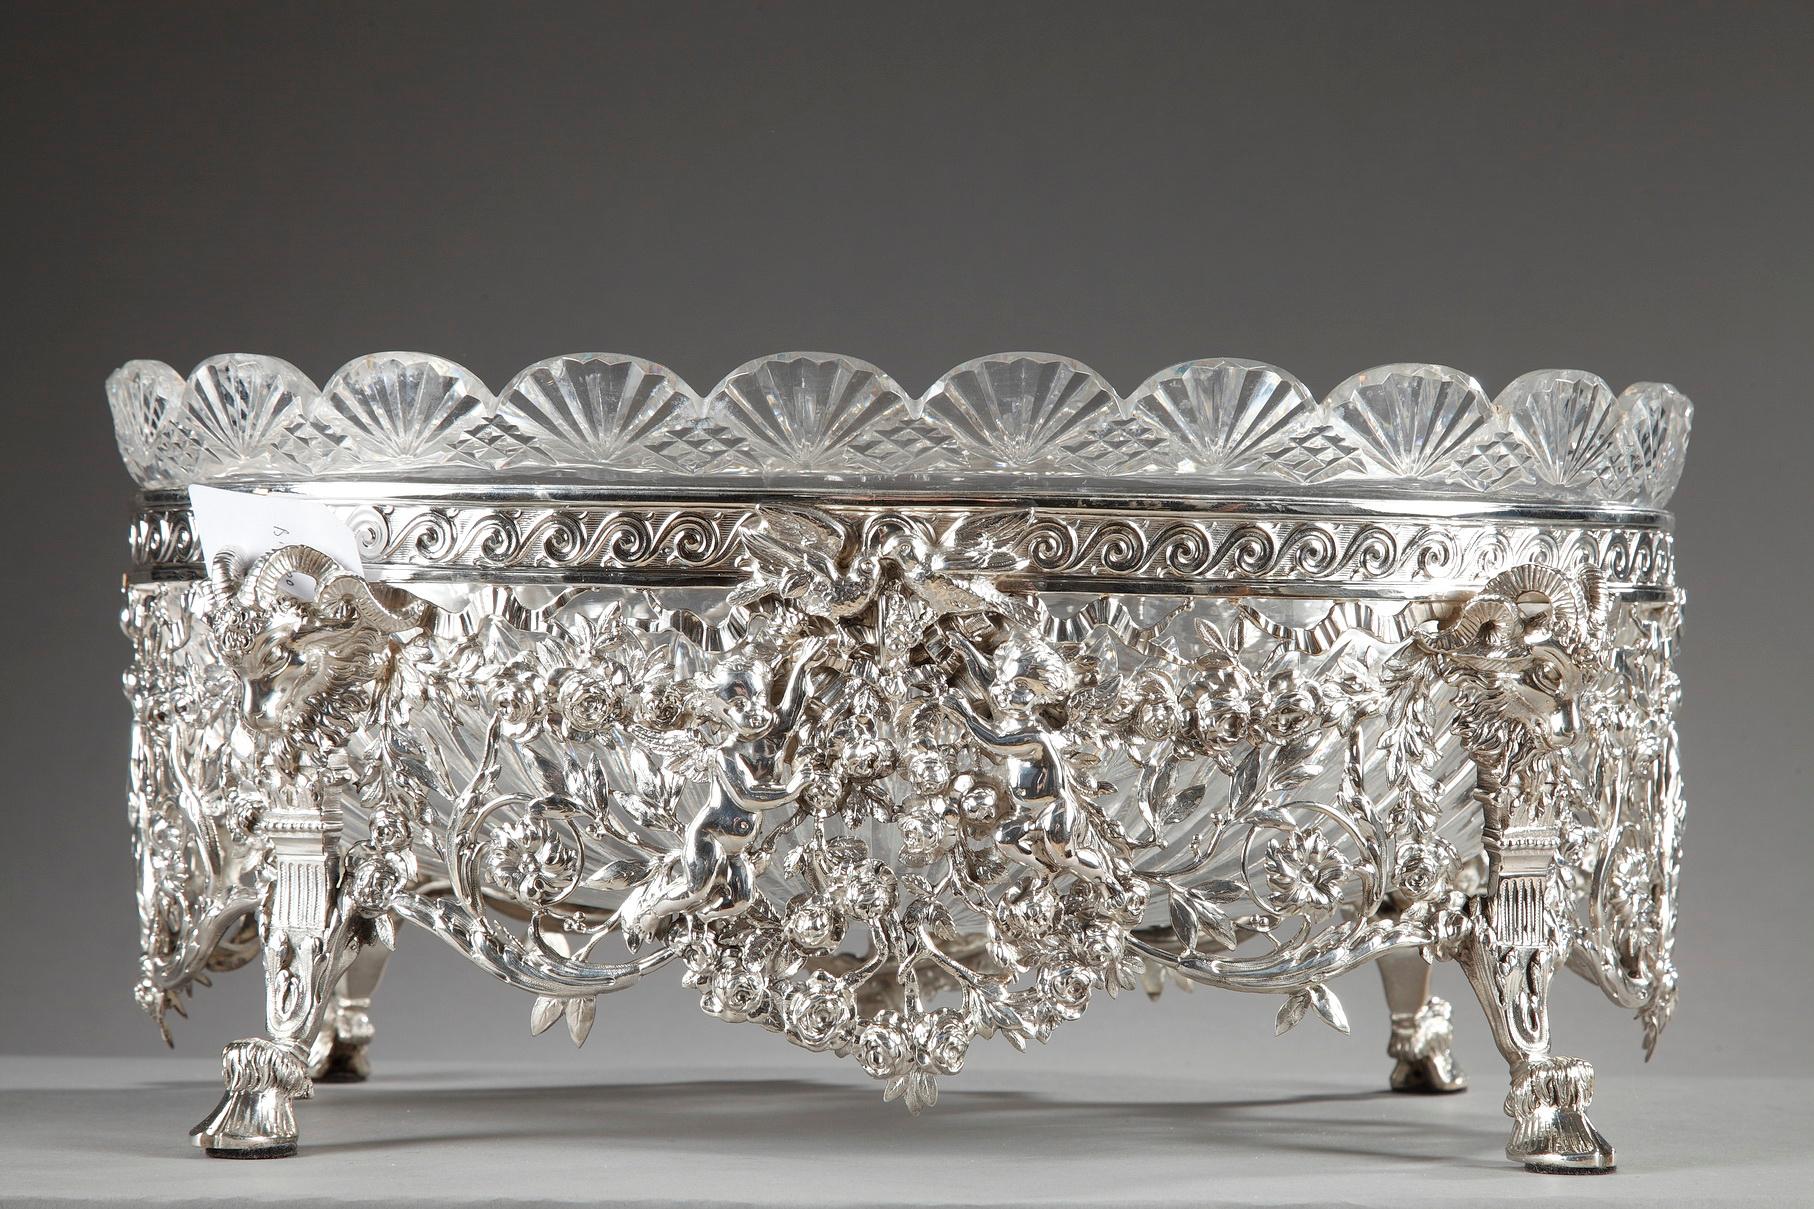 Silver jardinière composed of a cut-crystal, oval bowl resting in a silver frame. The scalloped edge of the crystal bowl is decorated with radiating and diamond-shaped patterns. The silver frame is richly decorated with openwork ribbons, Greek